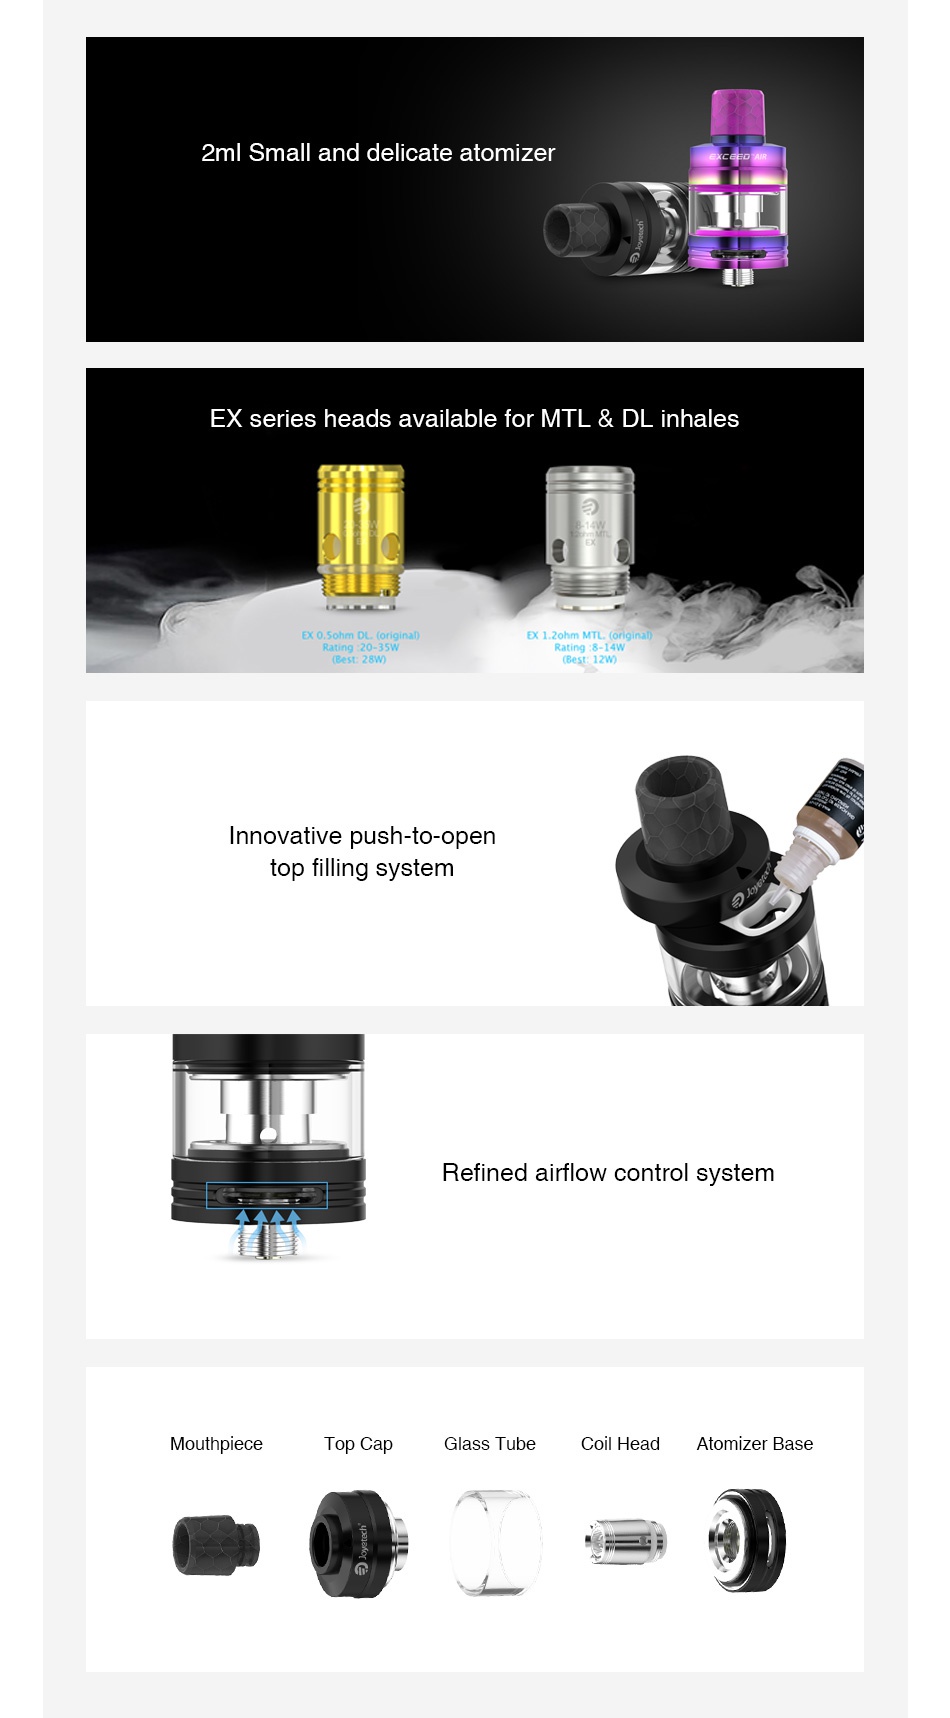 Joyetech Exceed Air Atomizer 2ml 2mI small and delicate atomizer EX series heads available for mtl dl inhales Ex 0  sohm DL  originan  Ex 1ohm MTL est 28w  Best  12w Innovative push to open top filling system Refined airflow control system piece Top Cap lass tube Coil head Atomizer base